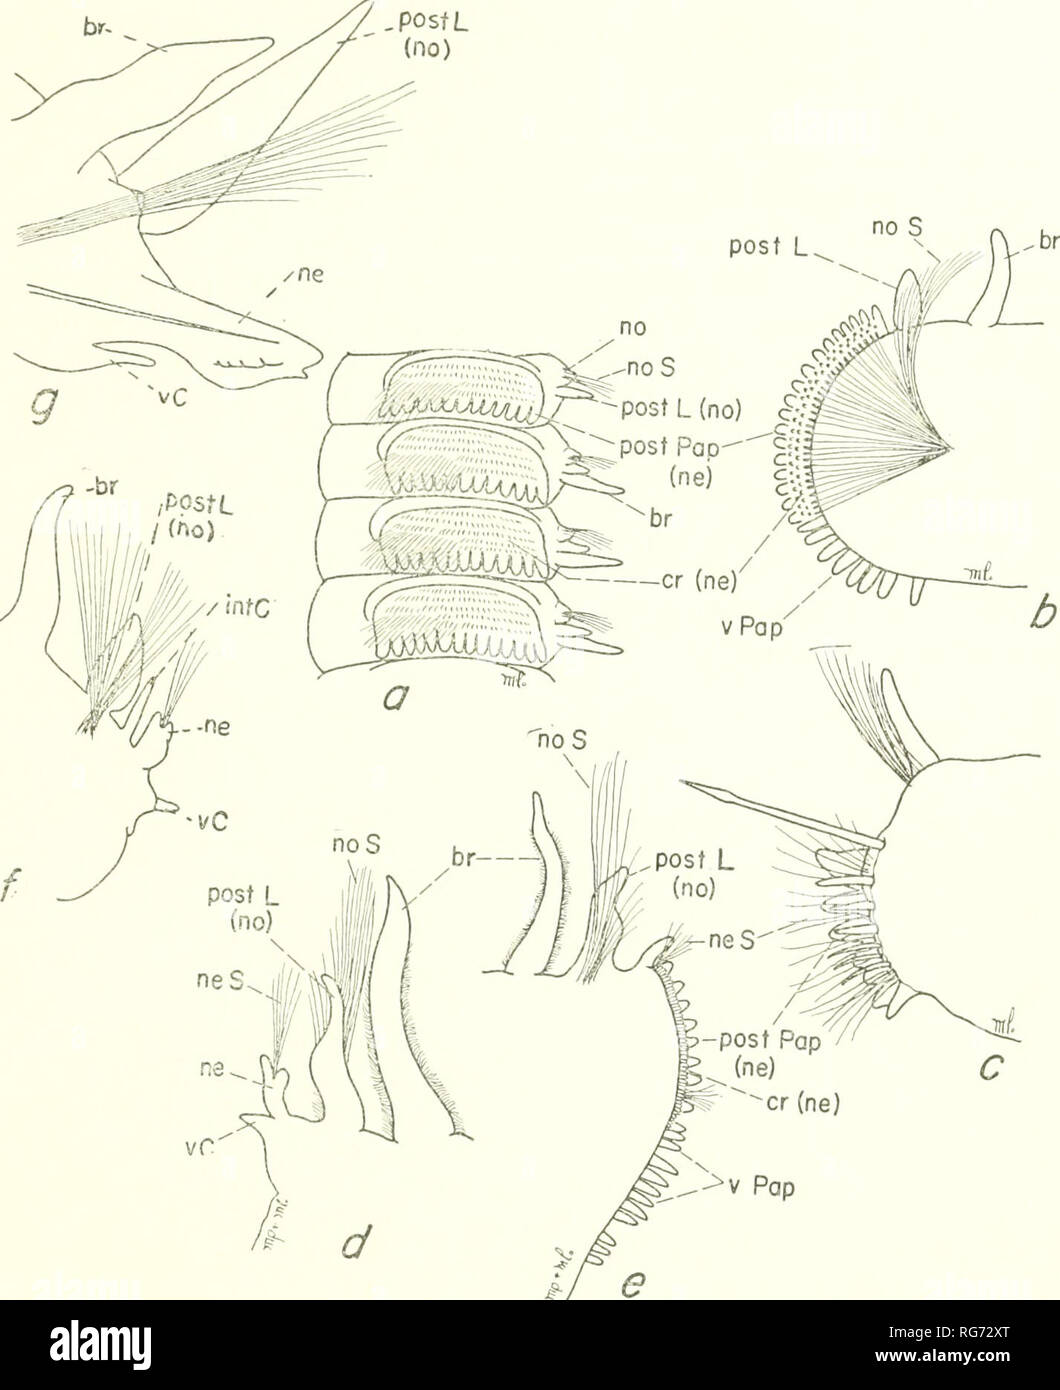 . Bulletin - United States National Museum. Science. POLYCHAETE WORMS, PART 1 283. Figure 75.—Orbiniidac, a-b, Orhinia ornata: a, lateral view setigers 4-7; b, thoracic parapodium from sctiger 15, anterior view, c, Orbinia norvegica, posterior thoracic parapodium, anterior view, d-e, Orbinia swani: d, left parapodium from abdominal setiger 24, posterior view; e, left thoracic parapodium from setiger 26, anterior view. /, Orbinia michaelseni, abdominal parapodium from setiger 23 (after Ehlers, 1897). g, Orbinia kupfferi, abdominal parapodium from setiger 23 (after Ehlers, 1875). Orbinia {JPhylo Stock Photo